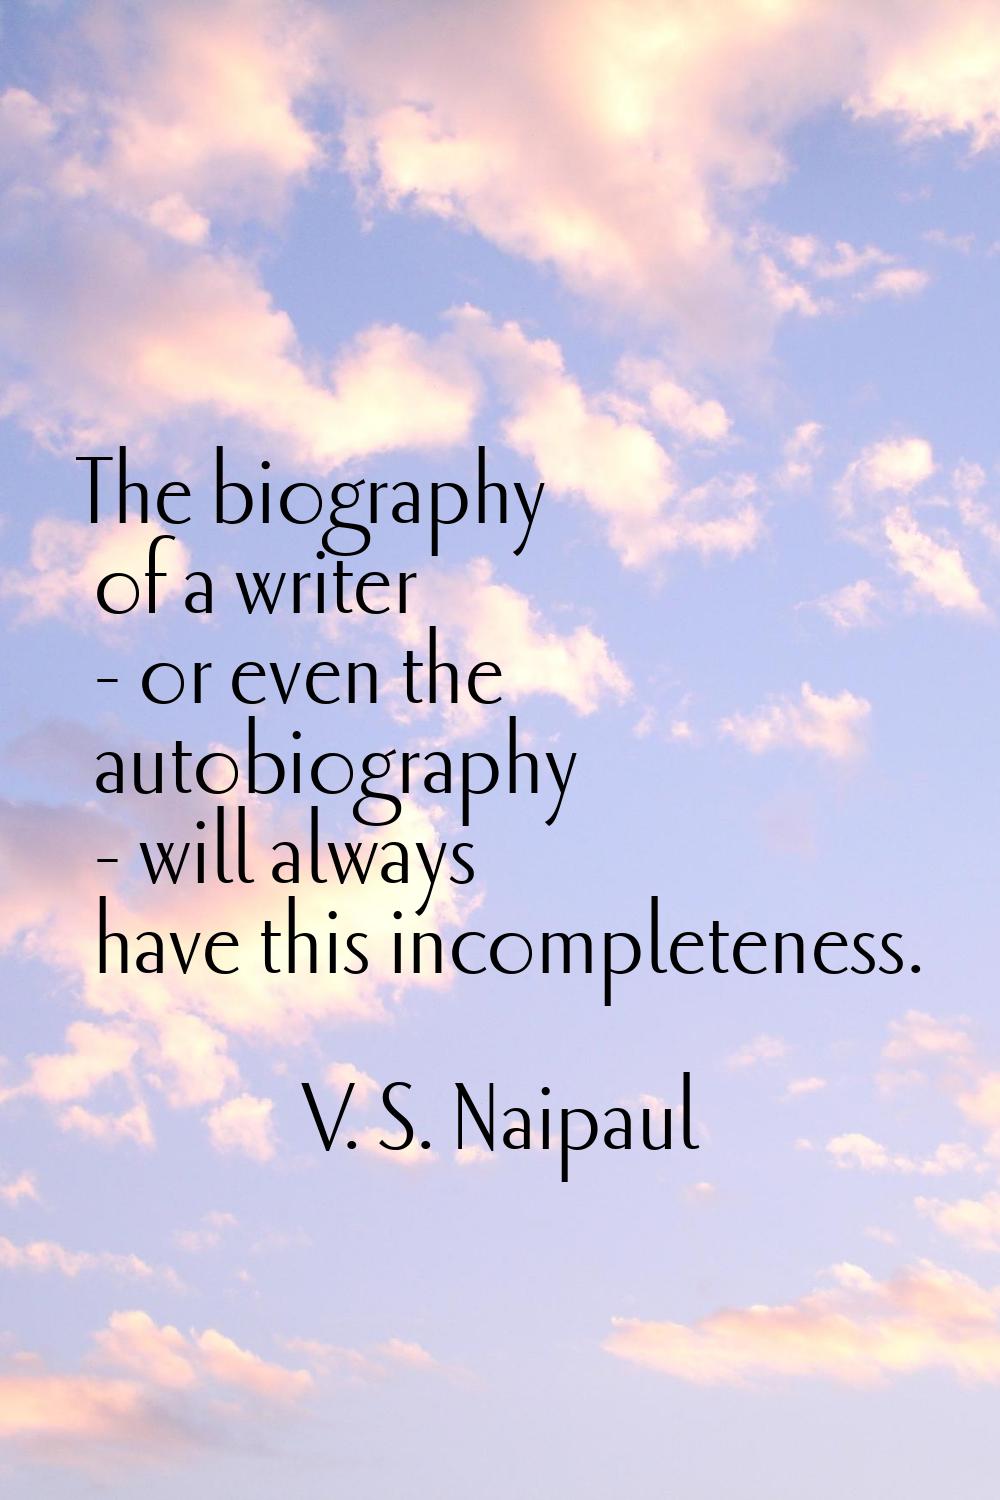 The biography of a writer - or even the autobiography - will always have this incompleteness.